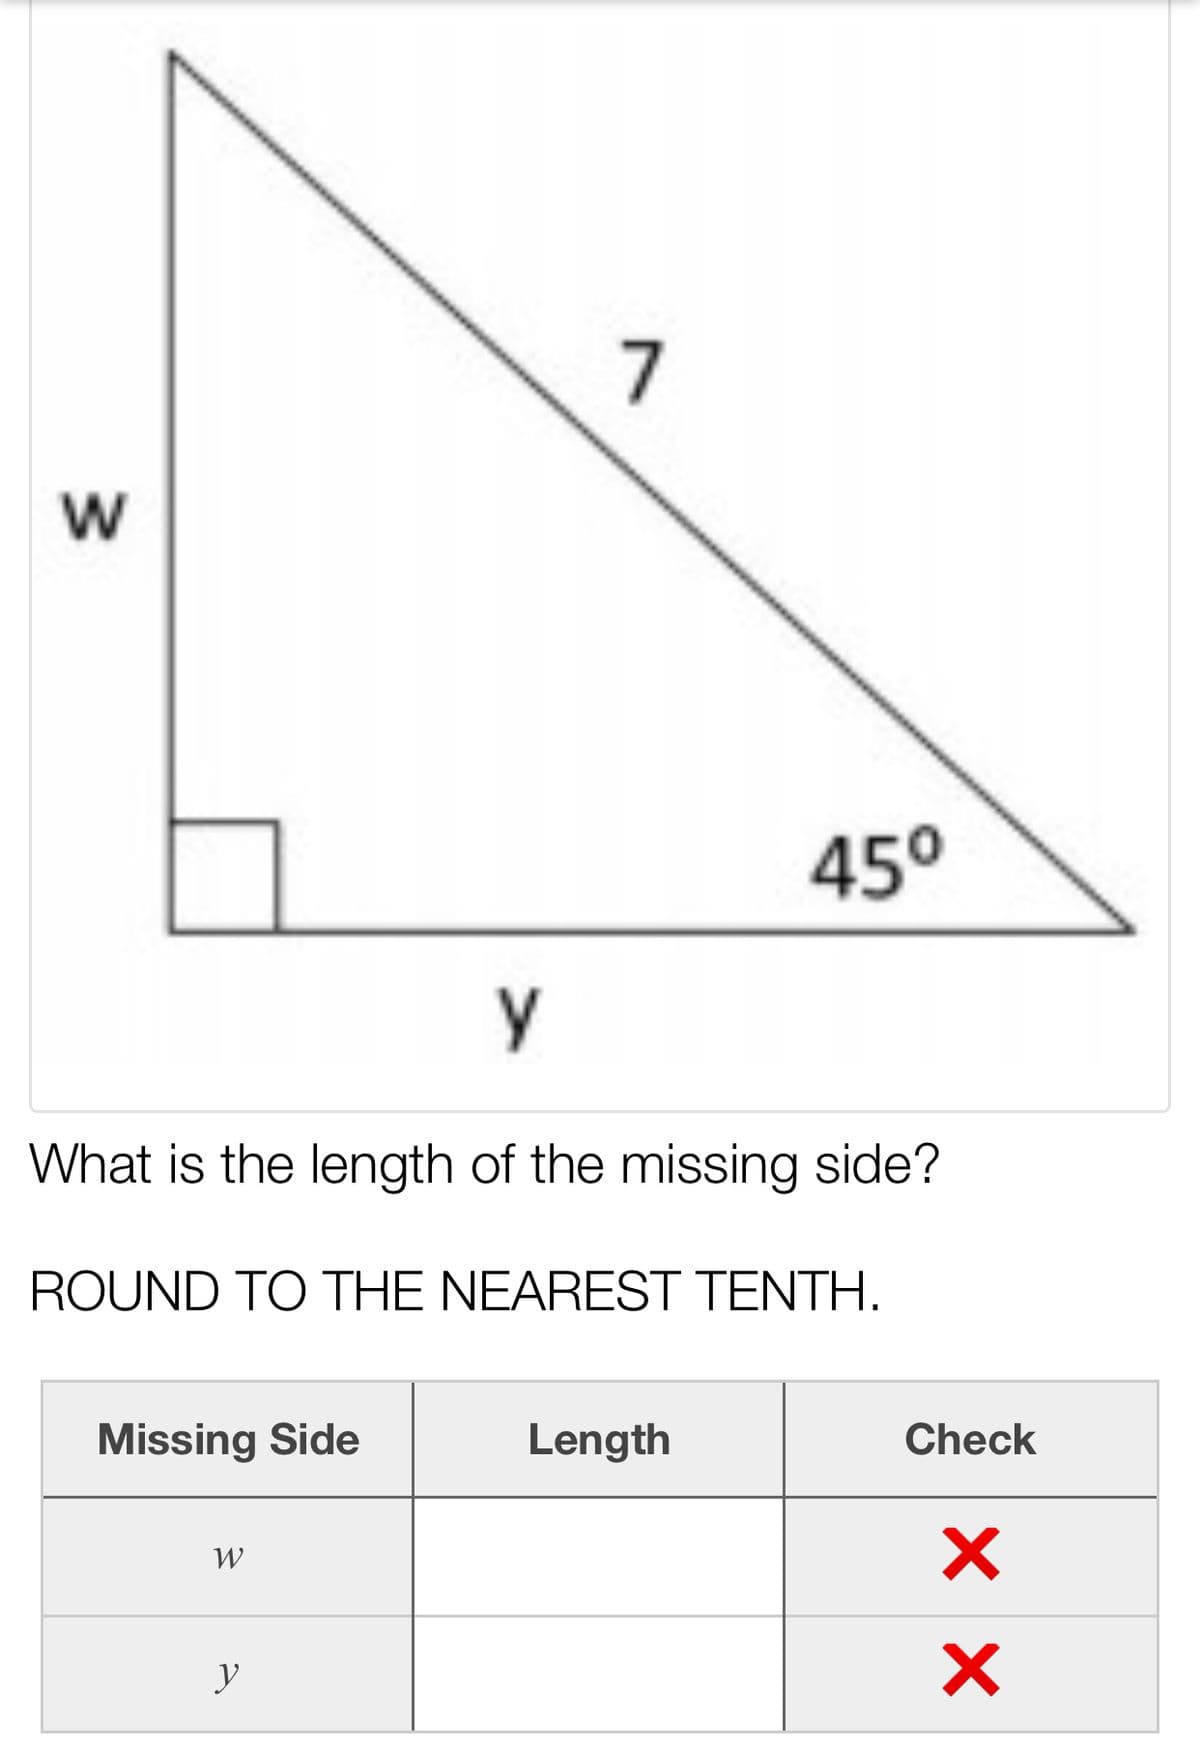 7
w
45°
y
What is the length of the missing side?
ROUND TO THE NEAREST TENTH.
Missing Side
Length
Check
y
